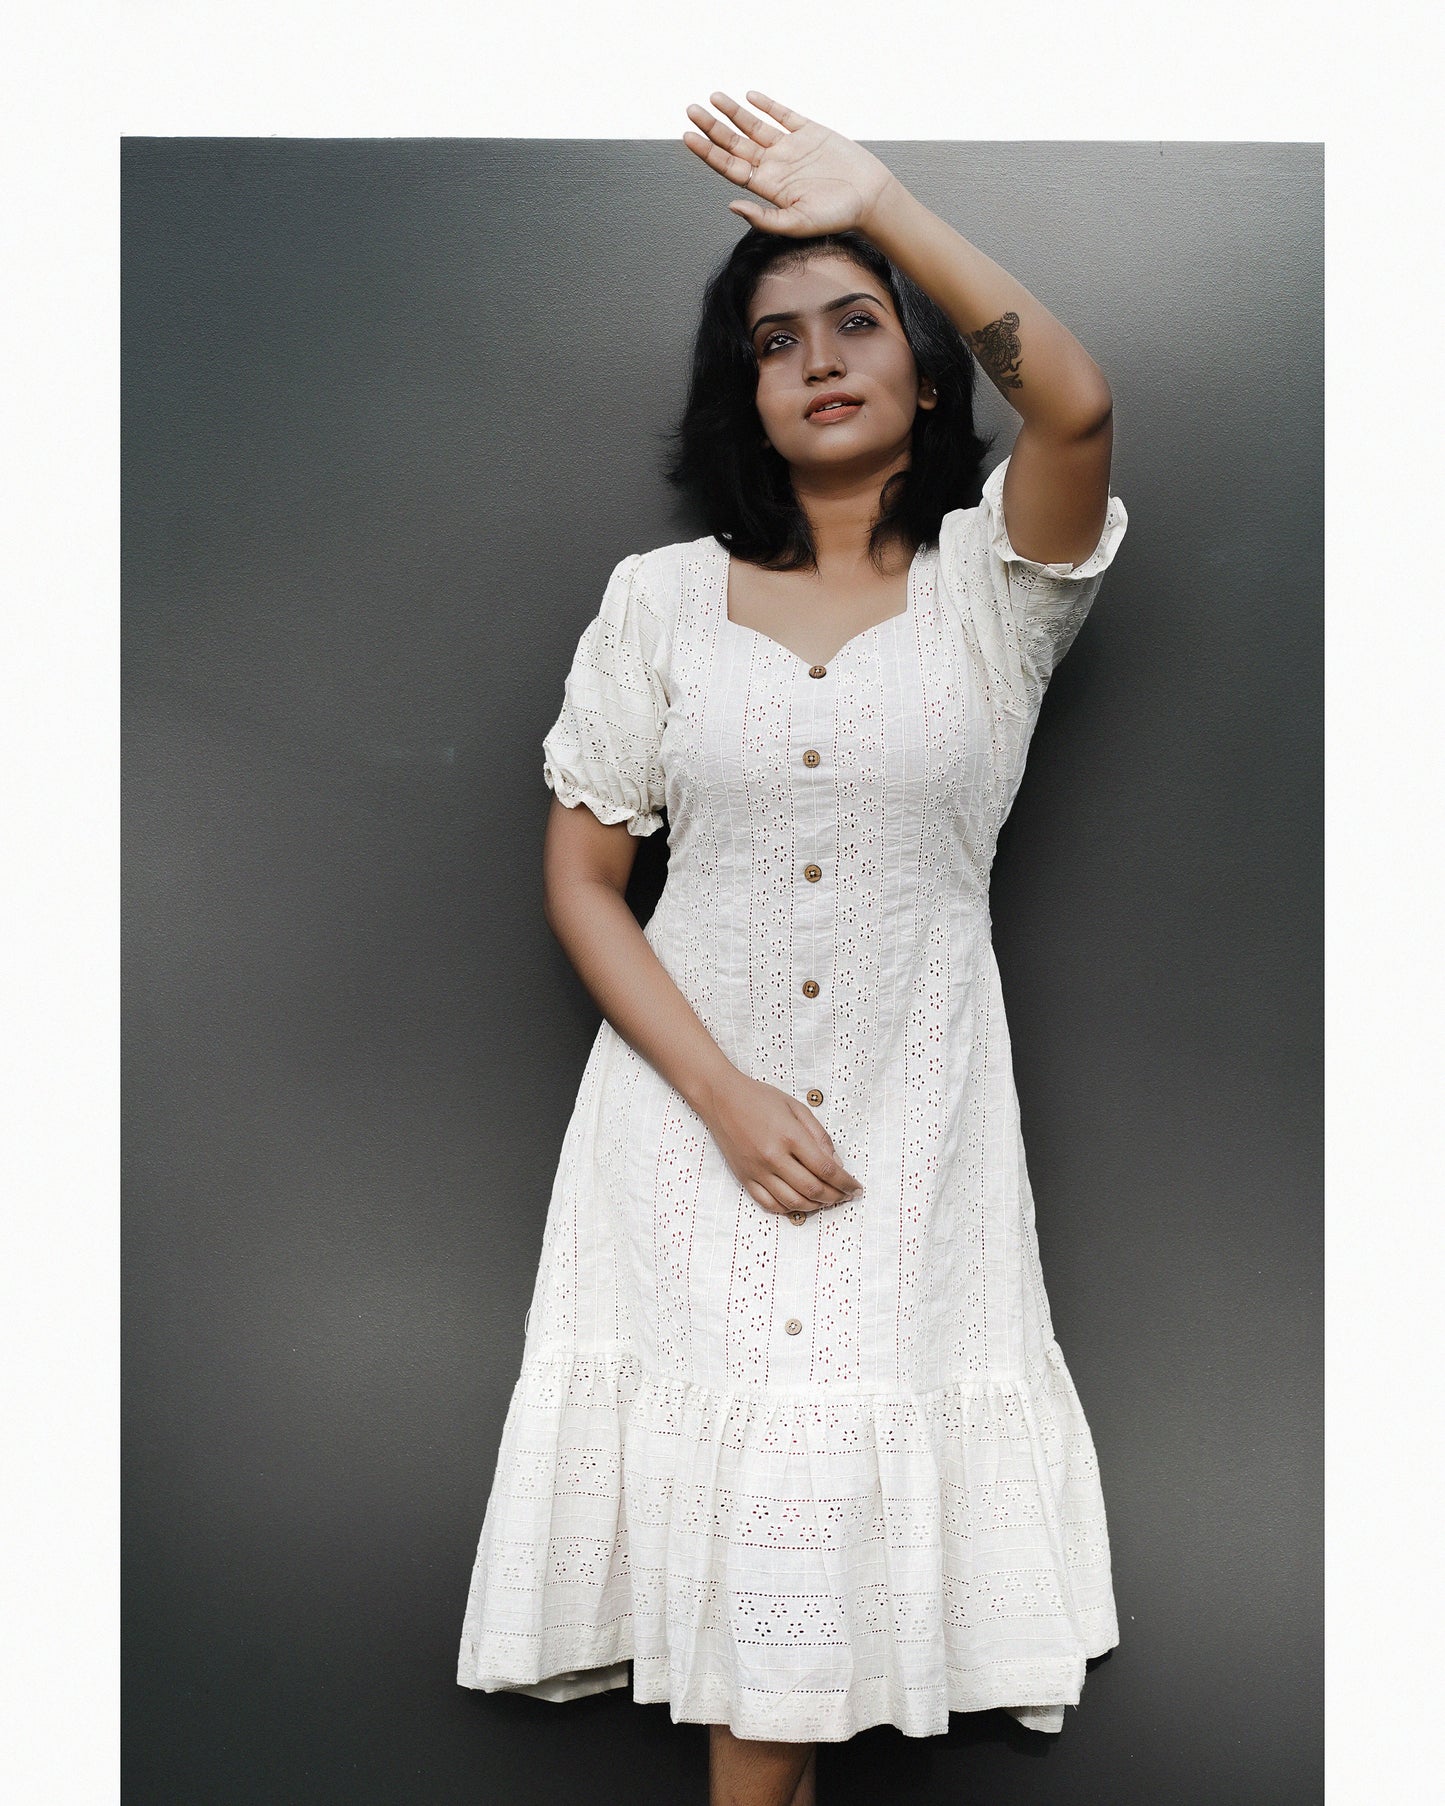 Hacoba Cotton - frock / dress / aline / kurti  in Cream shade with Crepe lining